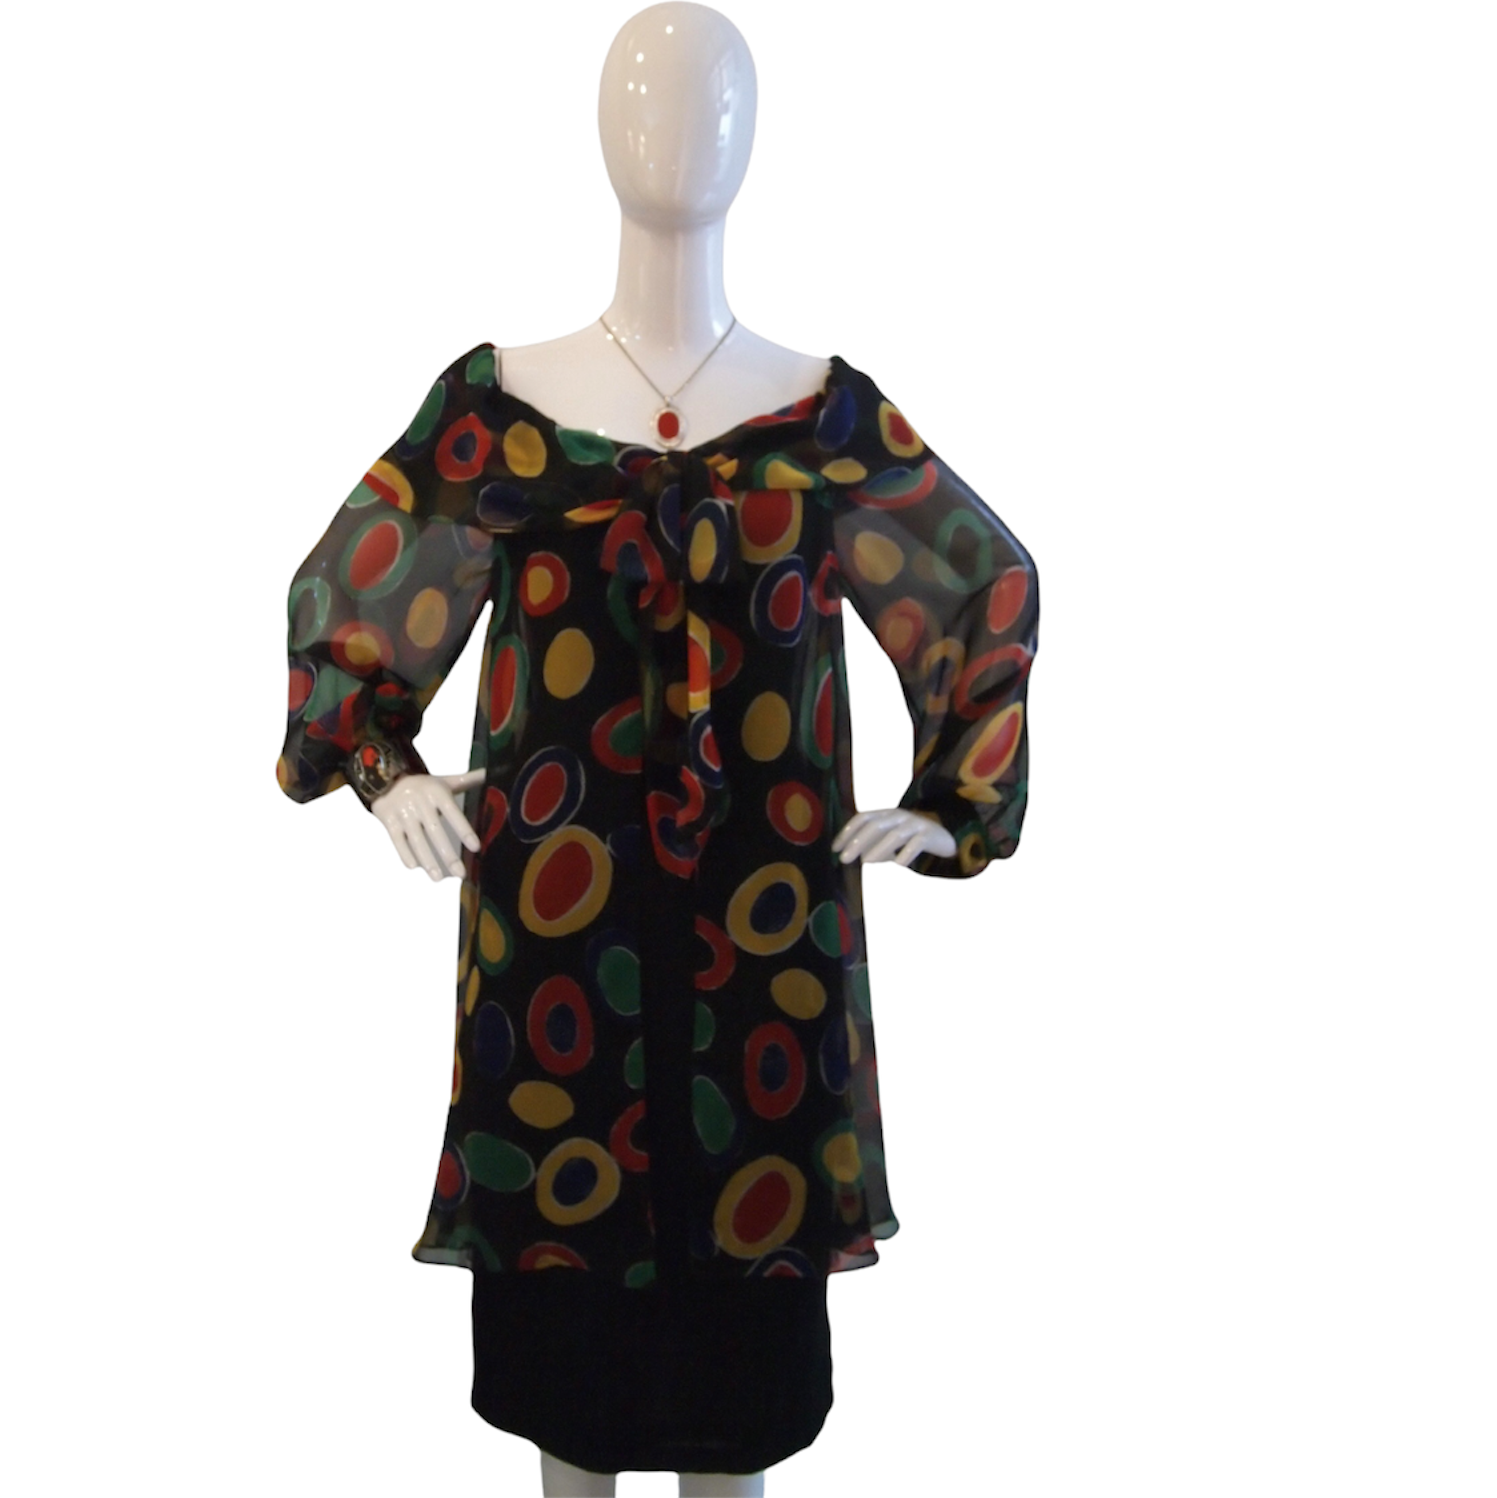 BILLOWY Vintage Frank Usher Dress with Quirky Black Sheer Layers